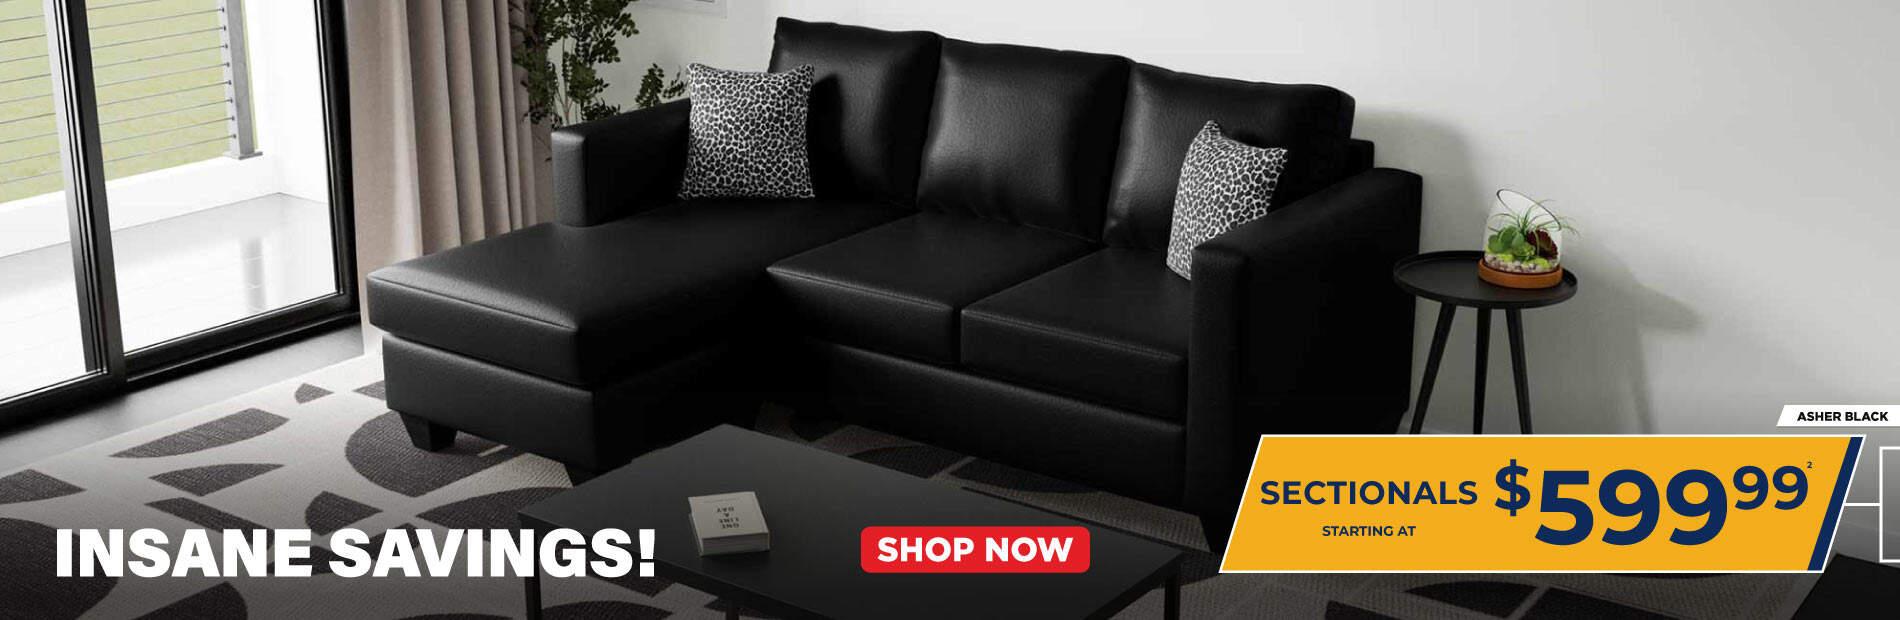 Insane Savings! Asher Black. Sectionals starting at 599.99.2. Shop now!